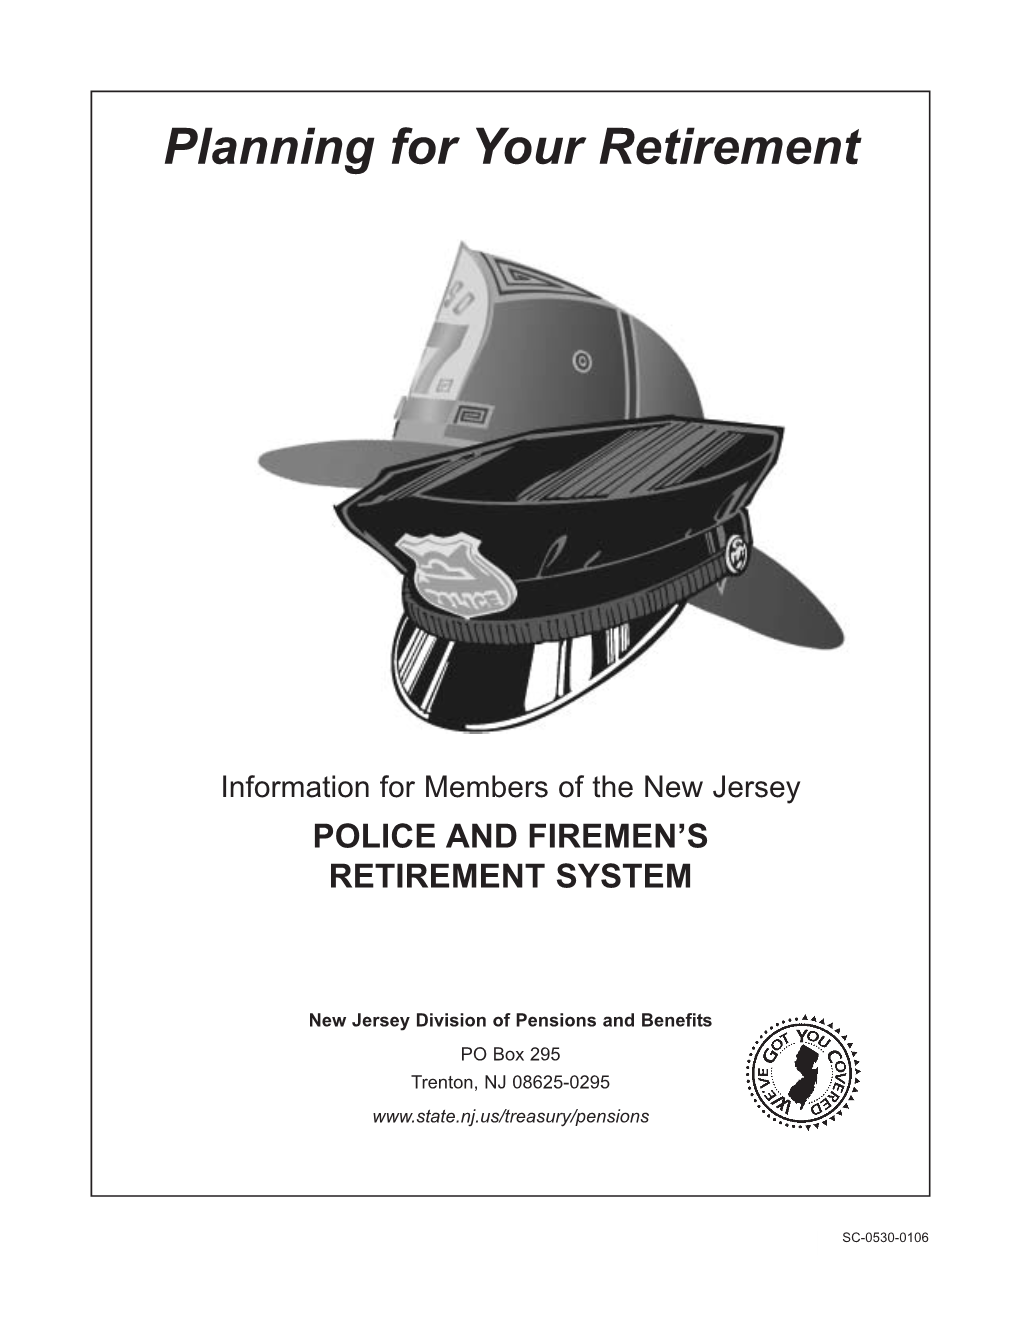 Retirement Facts PFRS